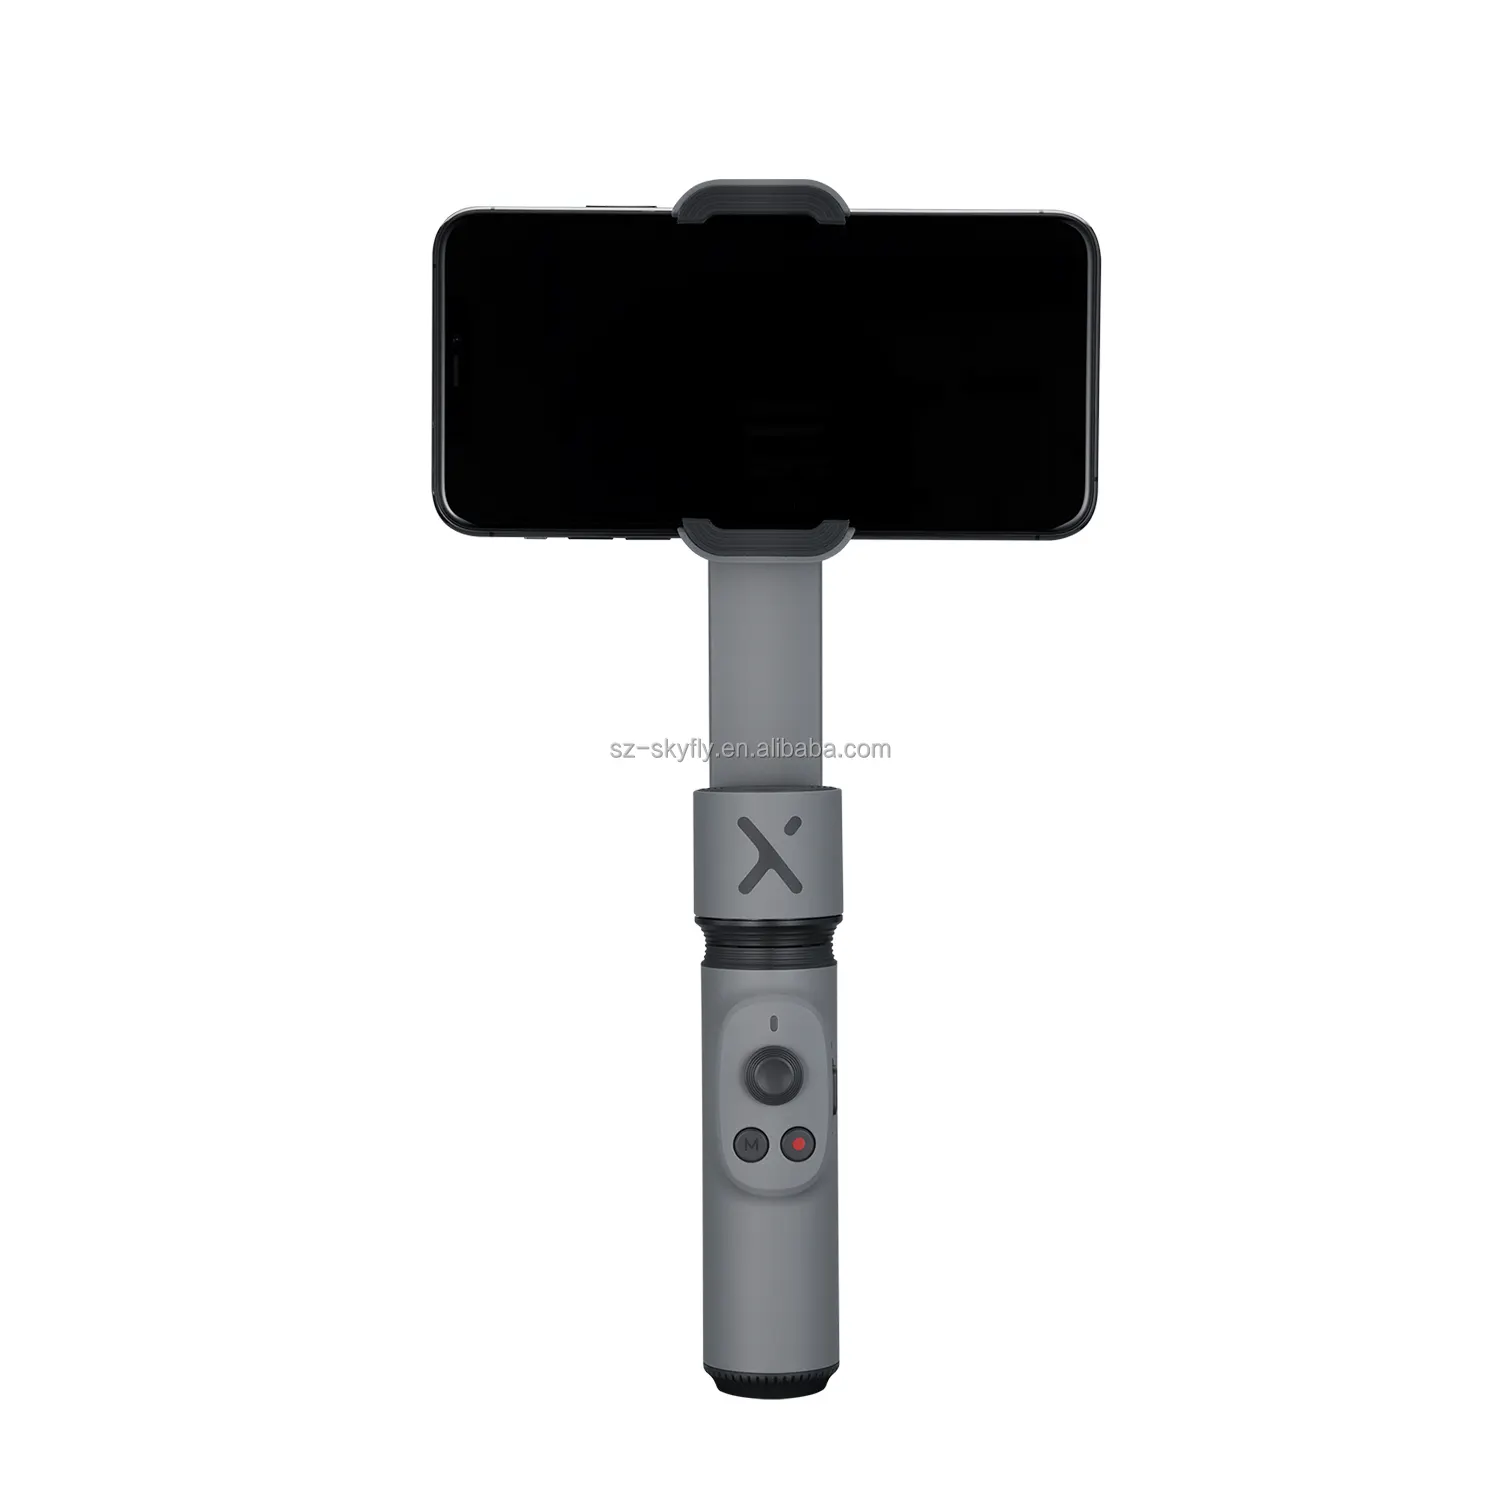 JHD Zhiyun Smooth X 2Axis Phone Stabilizer Handheld Gimbal with Selfie Stick for Smartphone iPhone Android Xiaomi/Samsung/Huawei